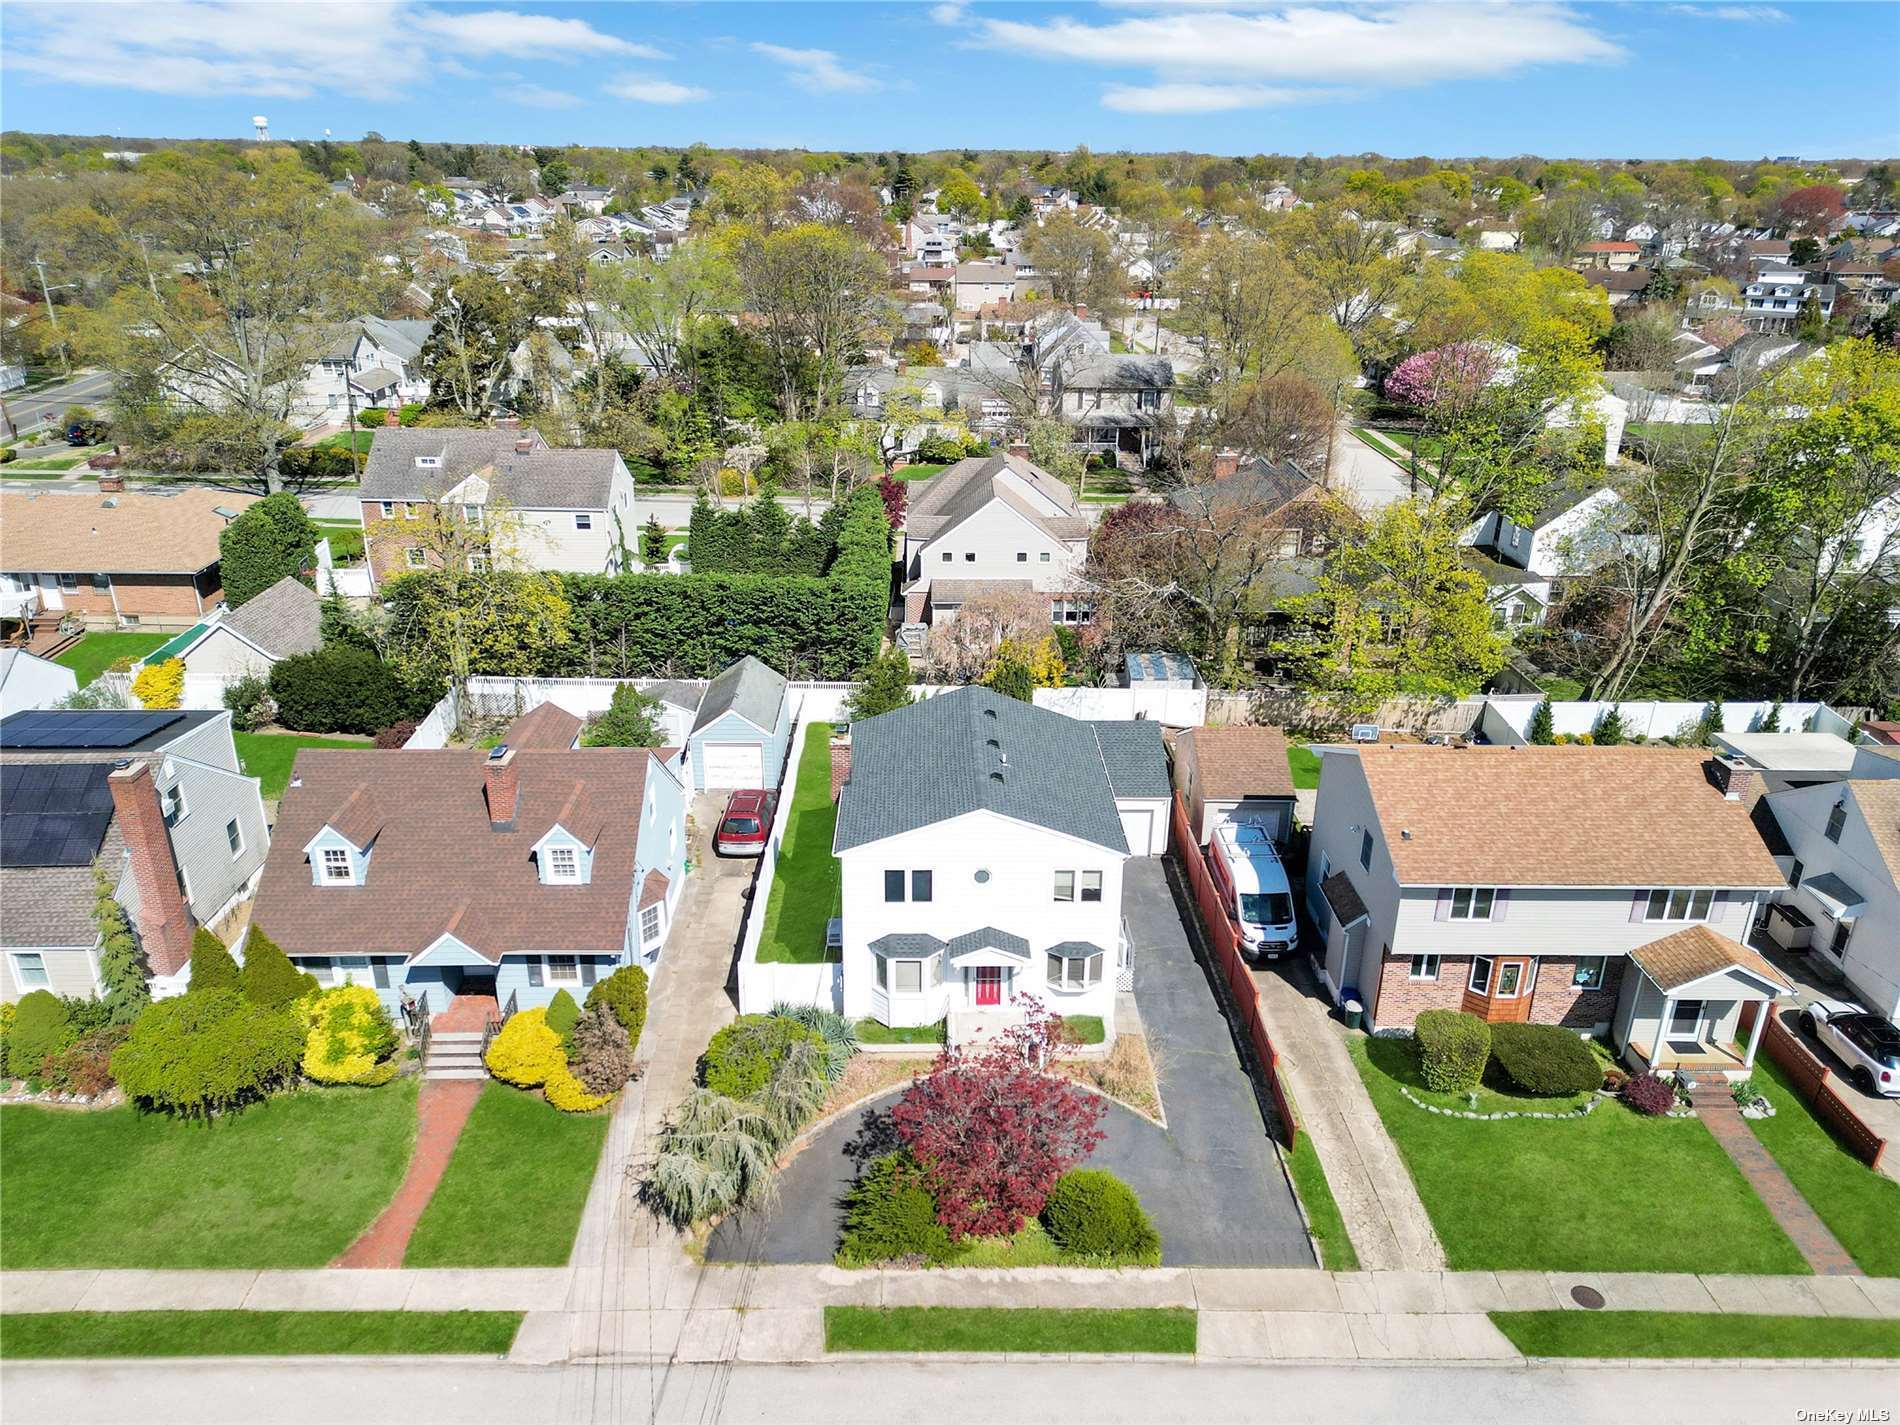 an aerial view of residential houses with yard